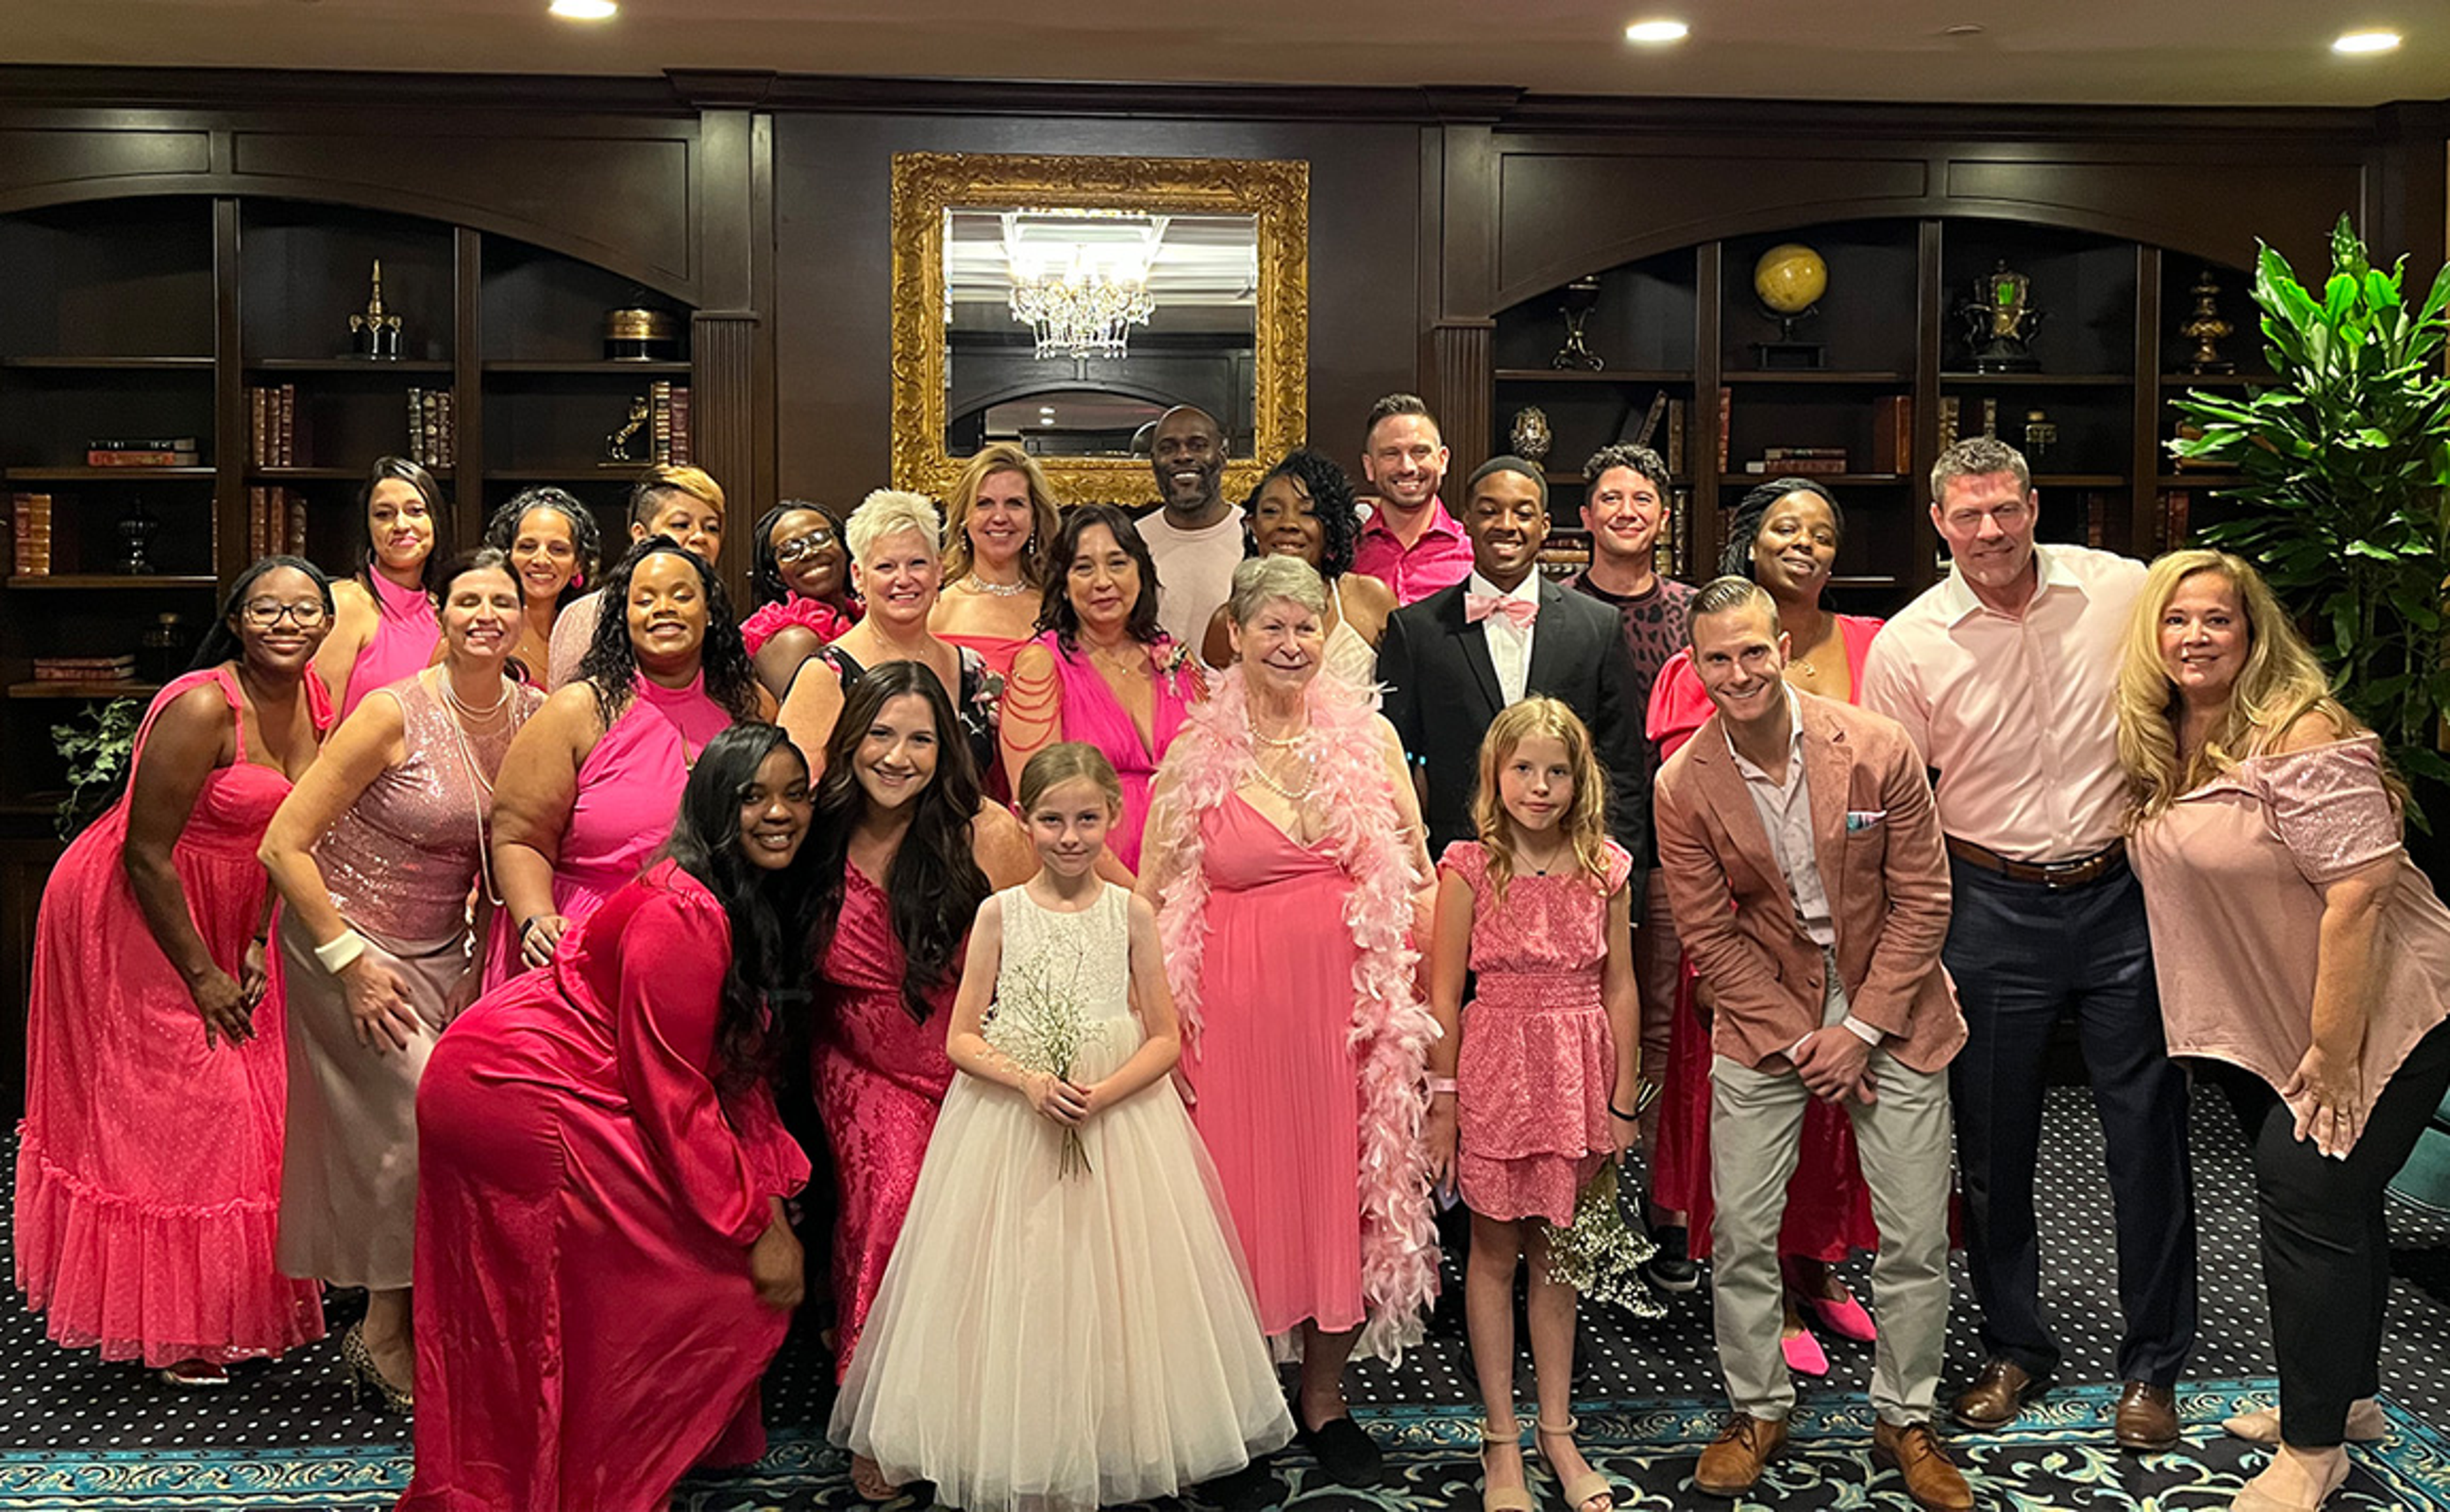 Brandywine Living at Voorhees hosts Fashion Show Fundraiser to benefit the Breast Cancer Research Foundation.